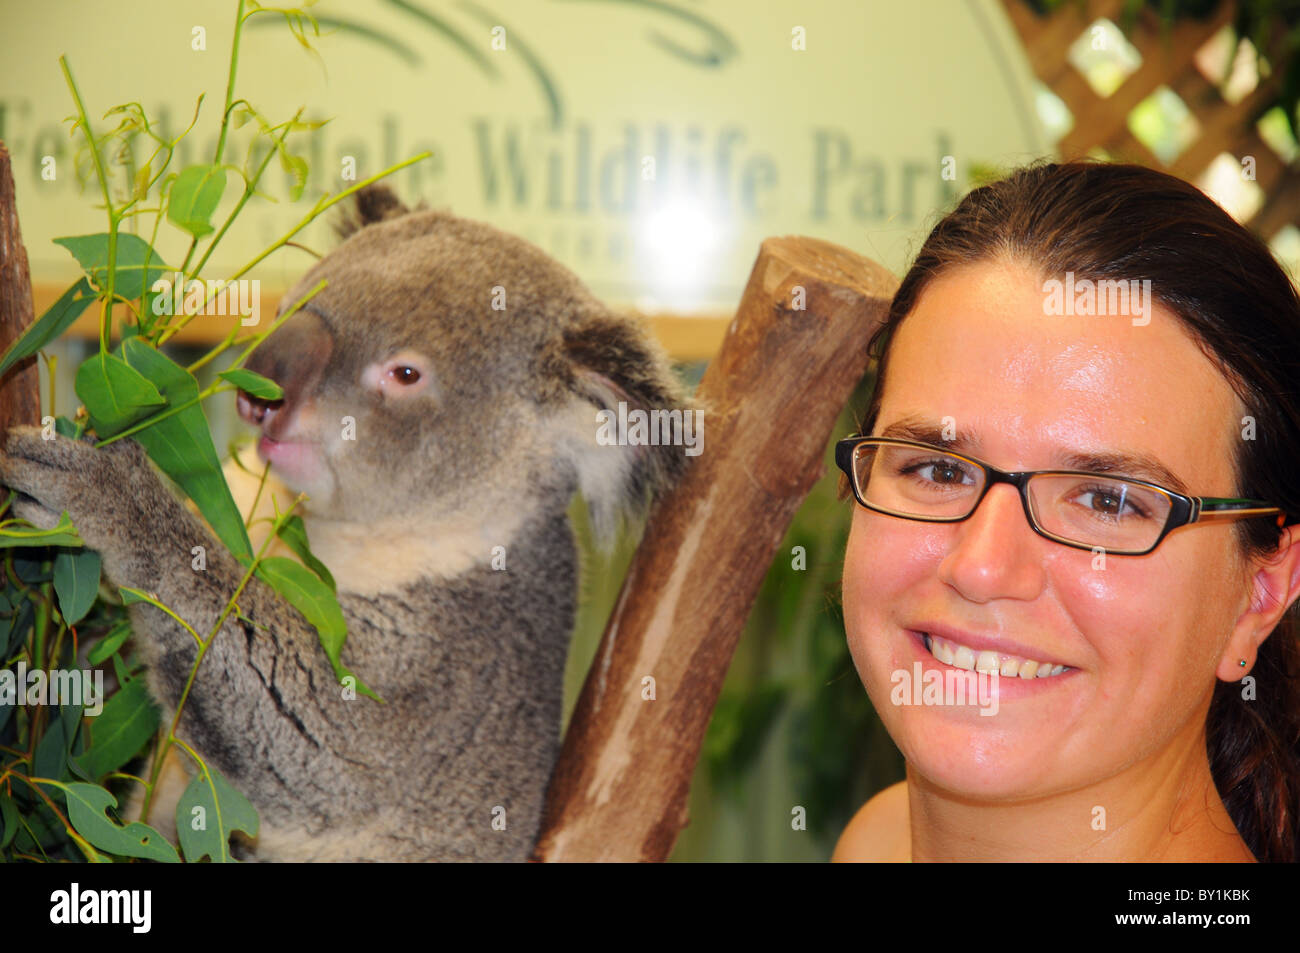 A young woman smiling with a koala Stock Photo